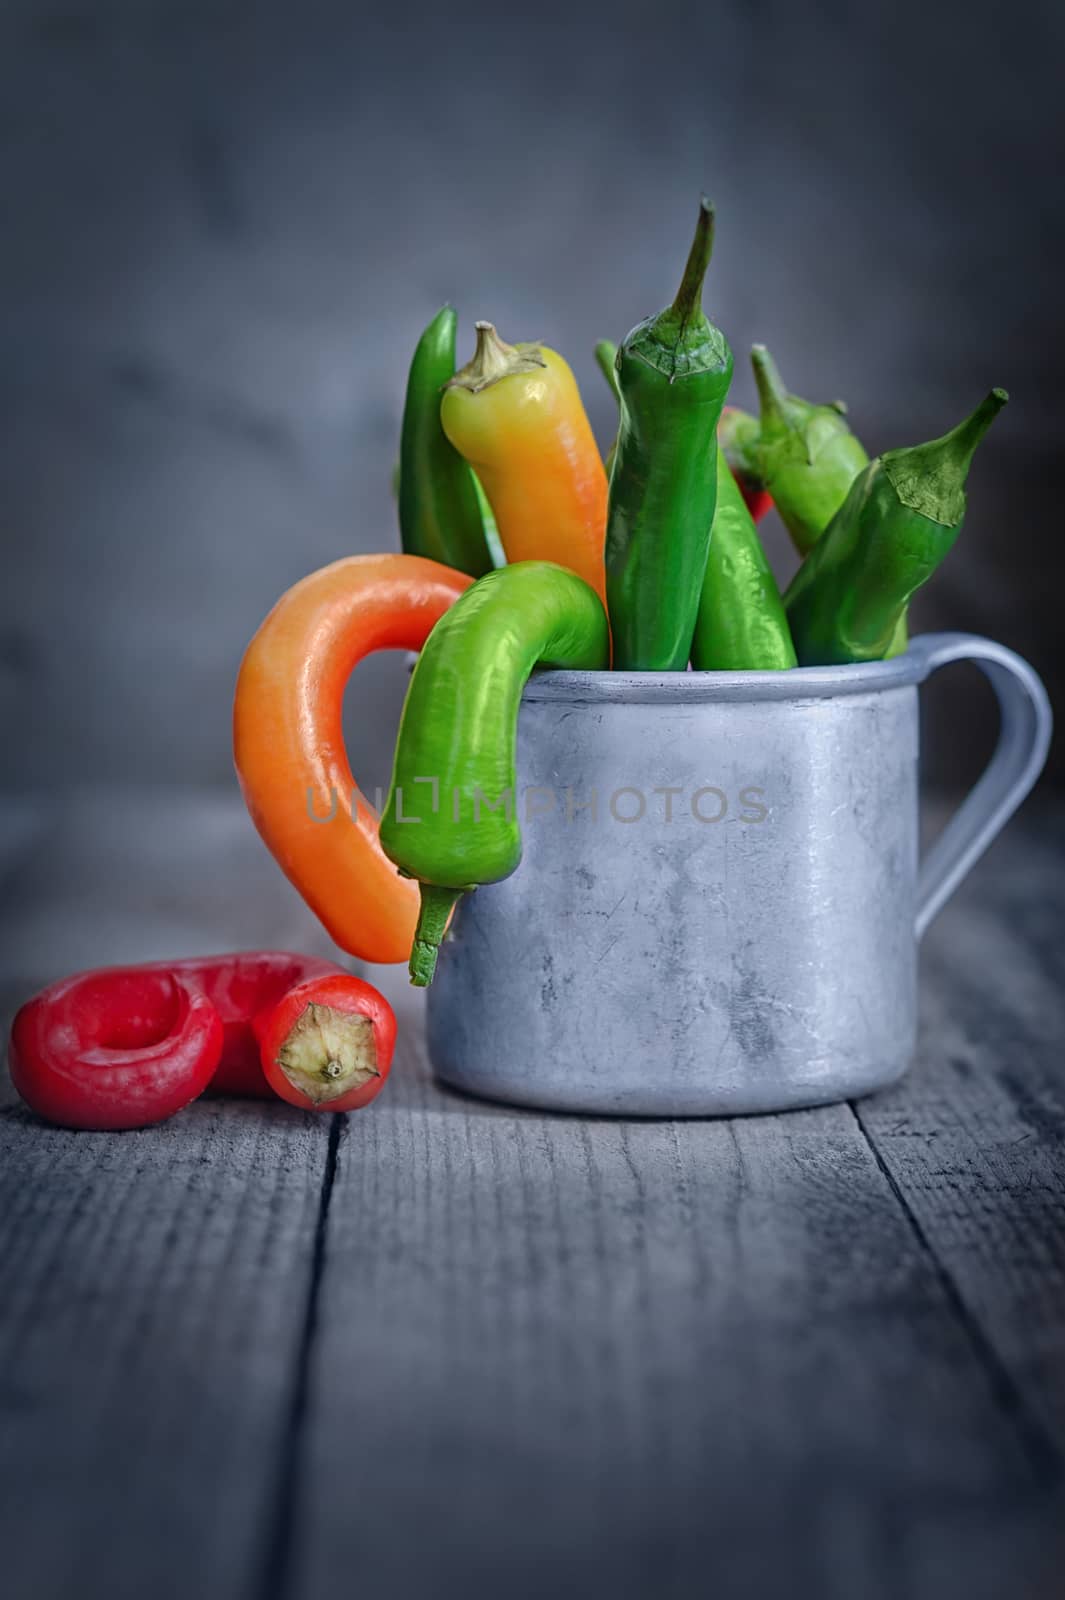 Chili pepper in a Cup on the table by Gaina